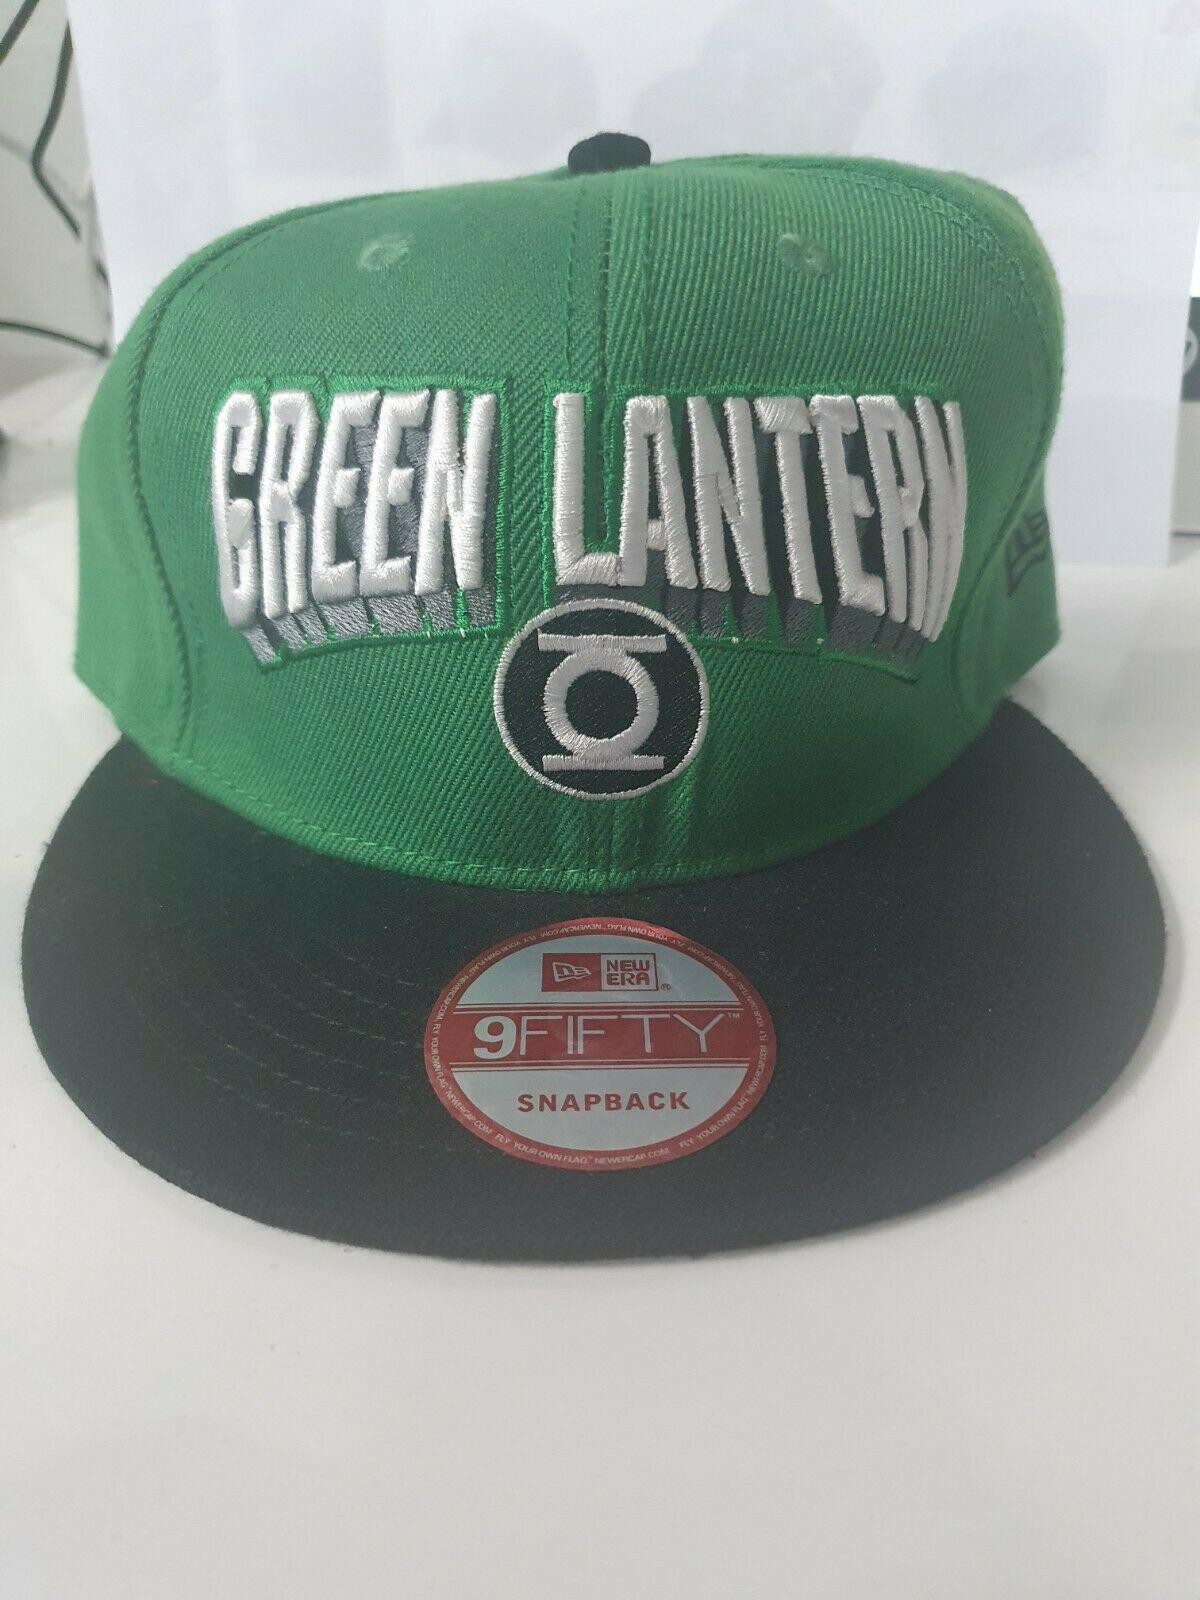 Green Lantern Hat Cap - Snapback - Suit Youth Adult - Free Express